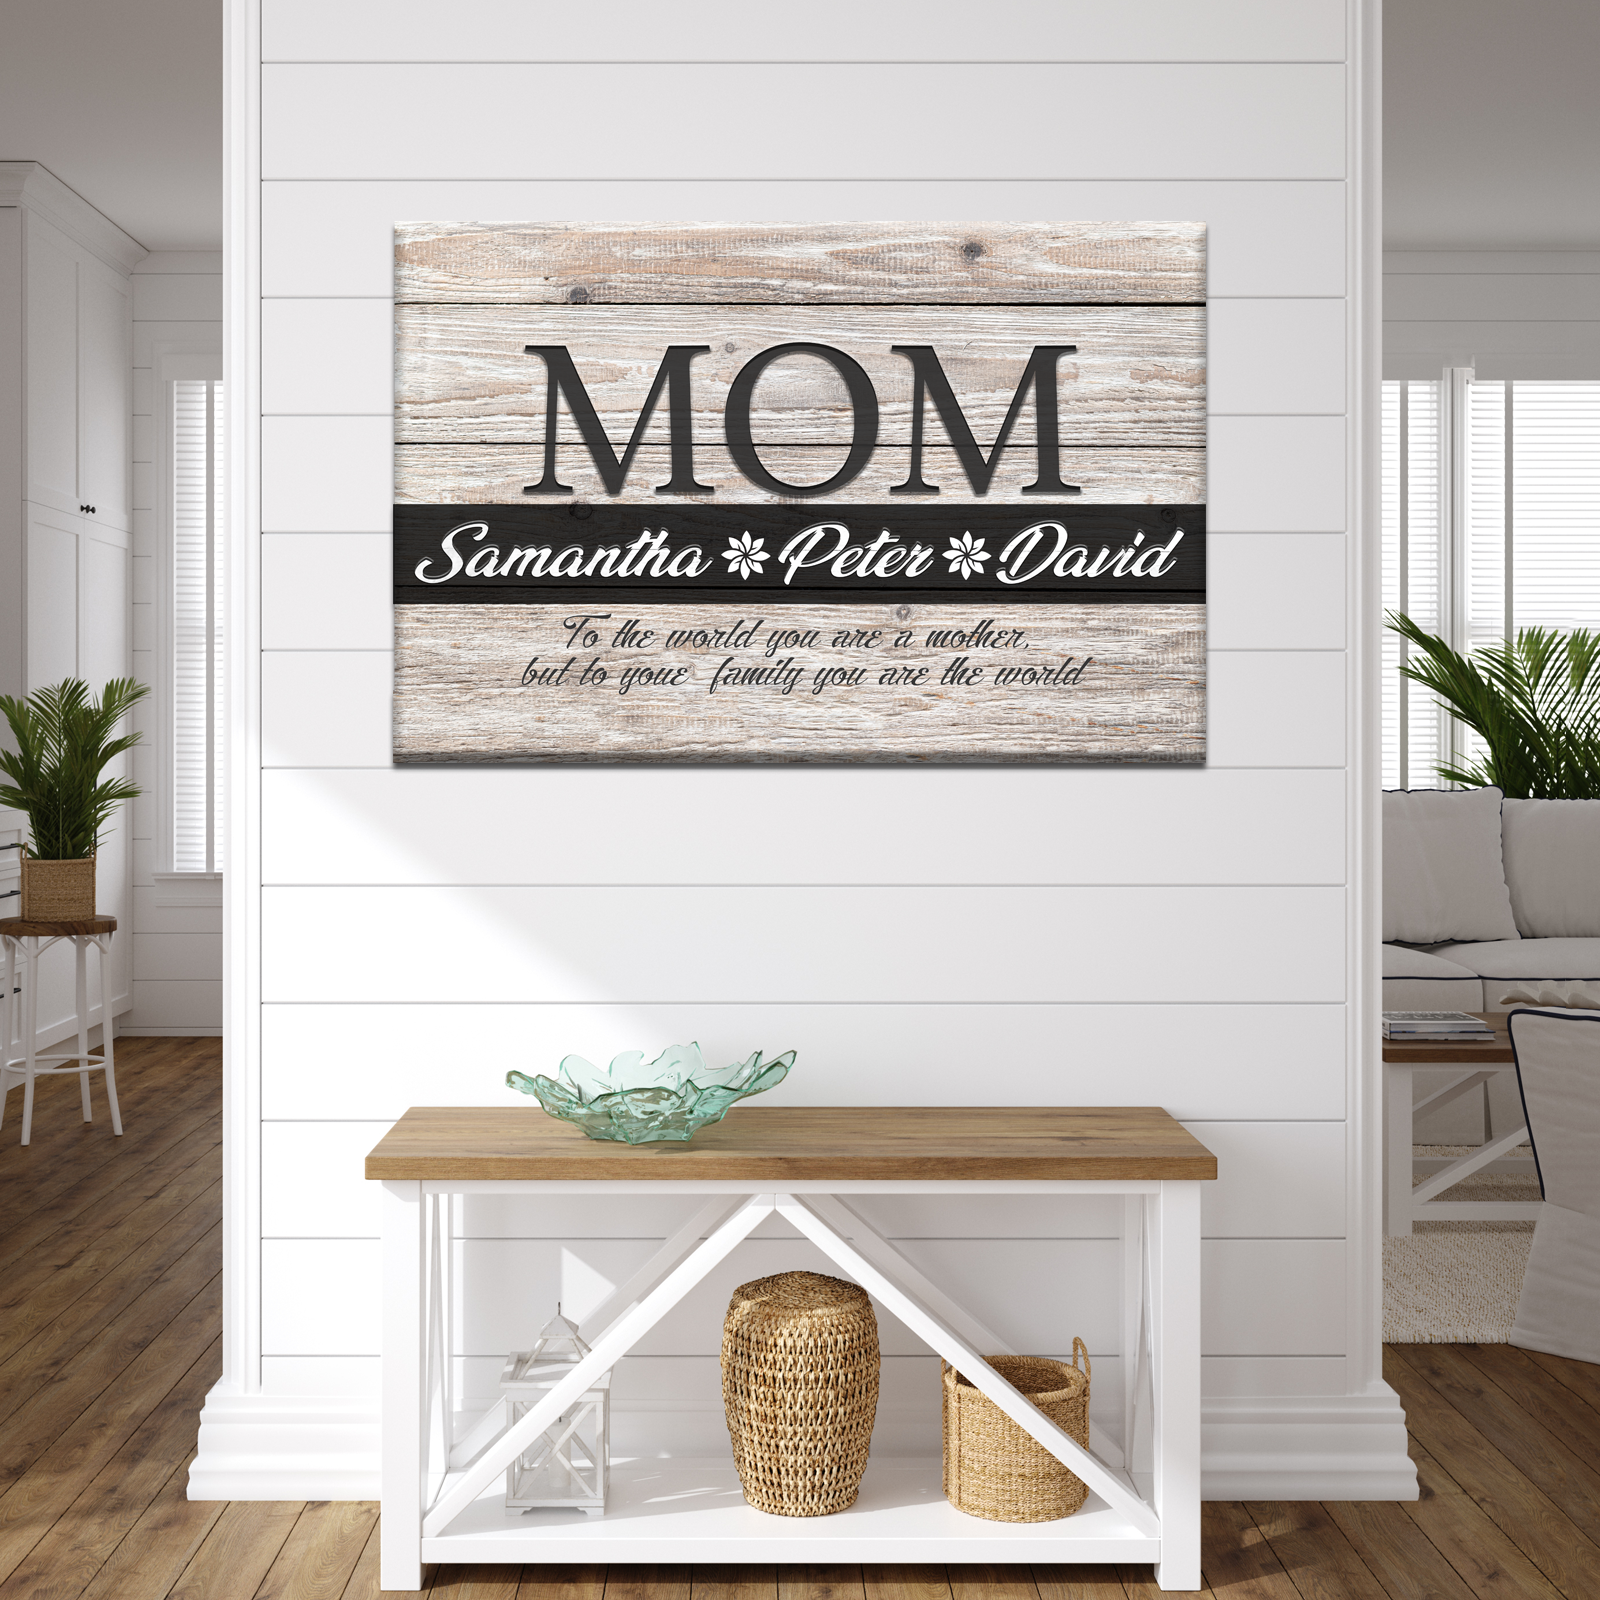 You Are the World, MOM Sign - Image by Tailored Canvases